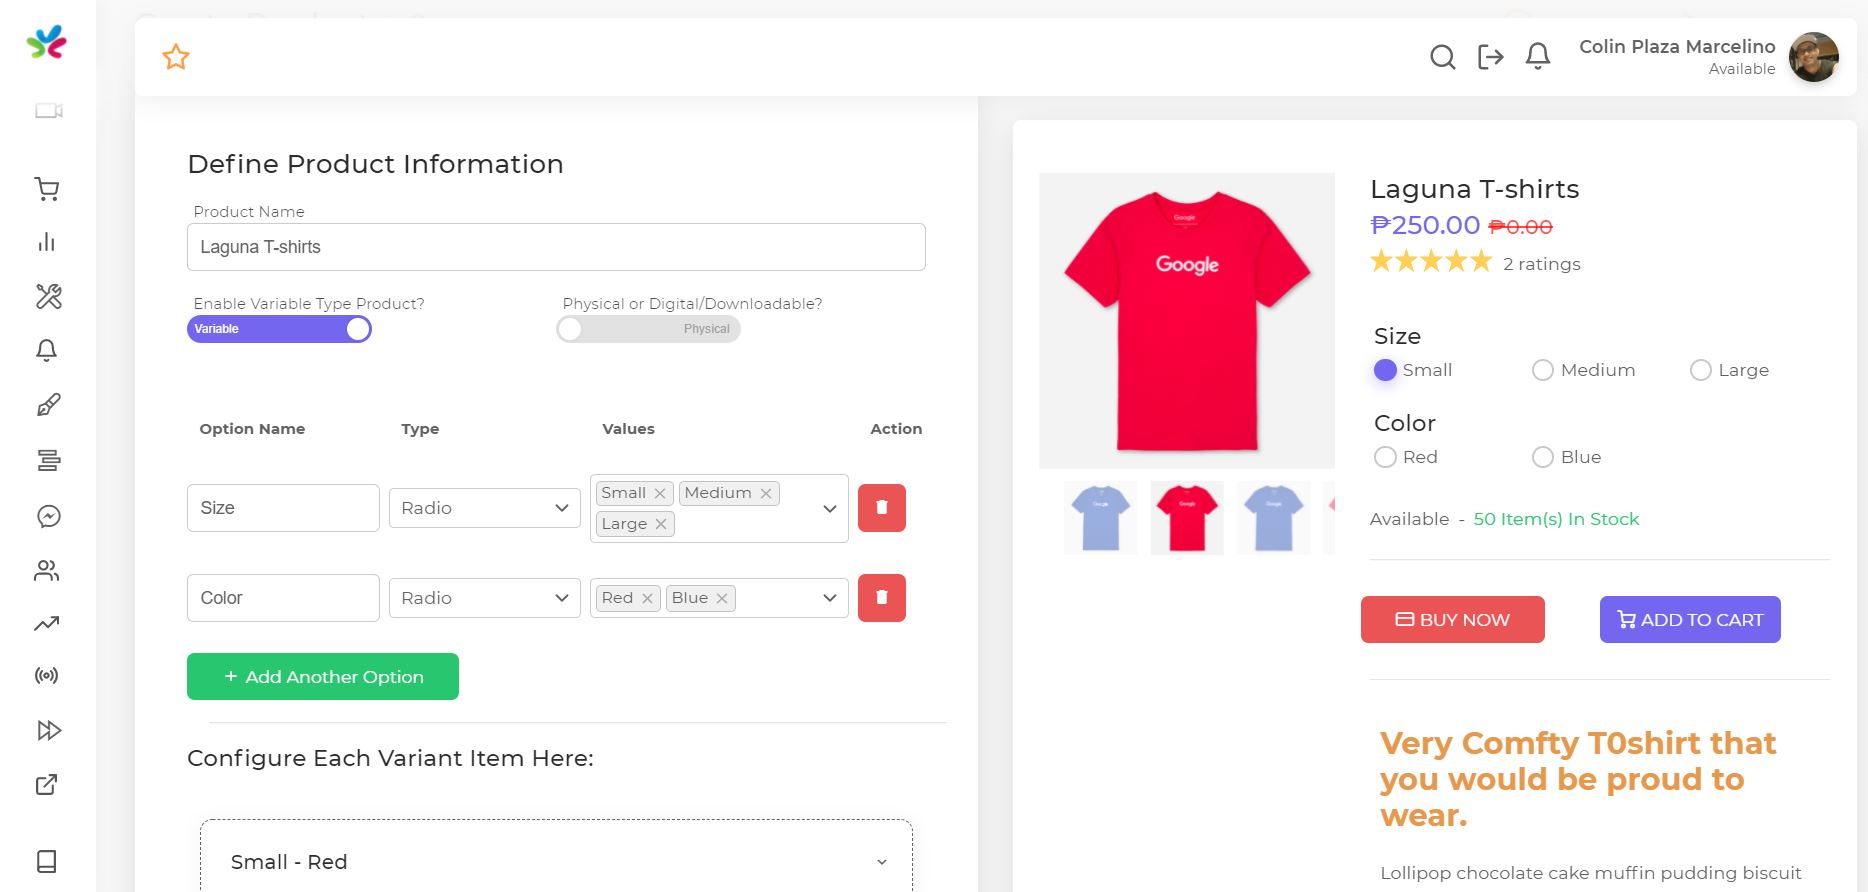 Full Package Ecommerce Feature. Start selling online in 5 minutes! Create simply, variable or digital products! Add coupons to spice up your promos. Seamlessly integrate with Email, SMS and Messenger features to effectively communicate with your customers